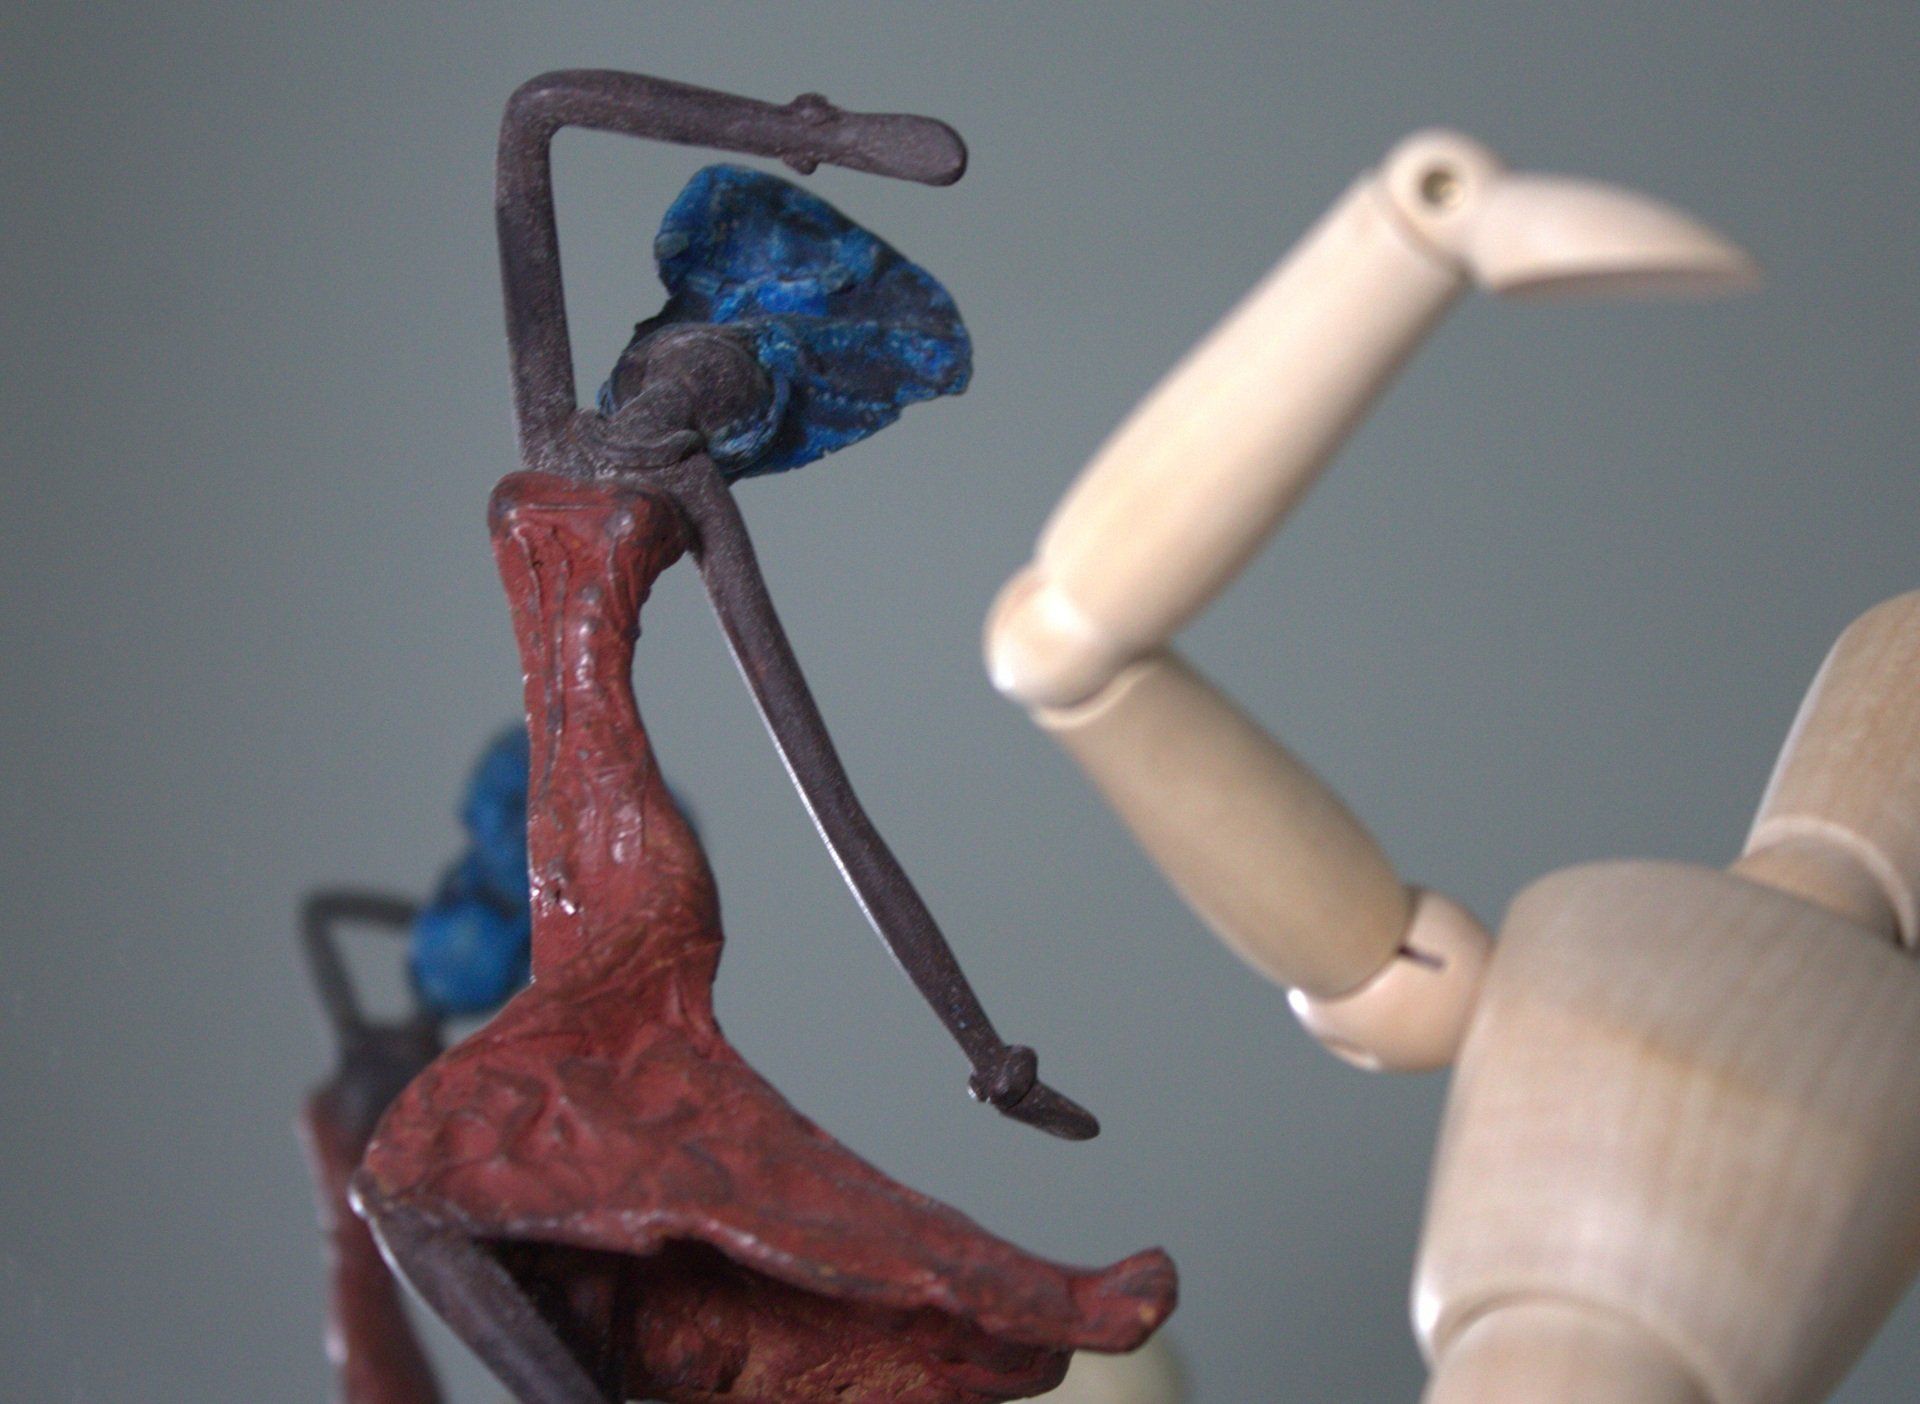 Dancing figures, in focus Black woman, red dress and blue hat, foreground wooden artist model